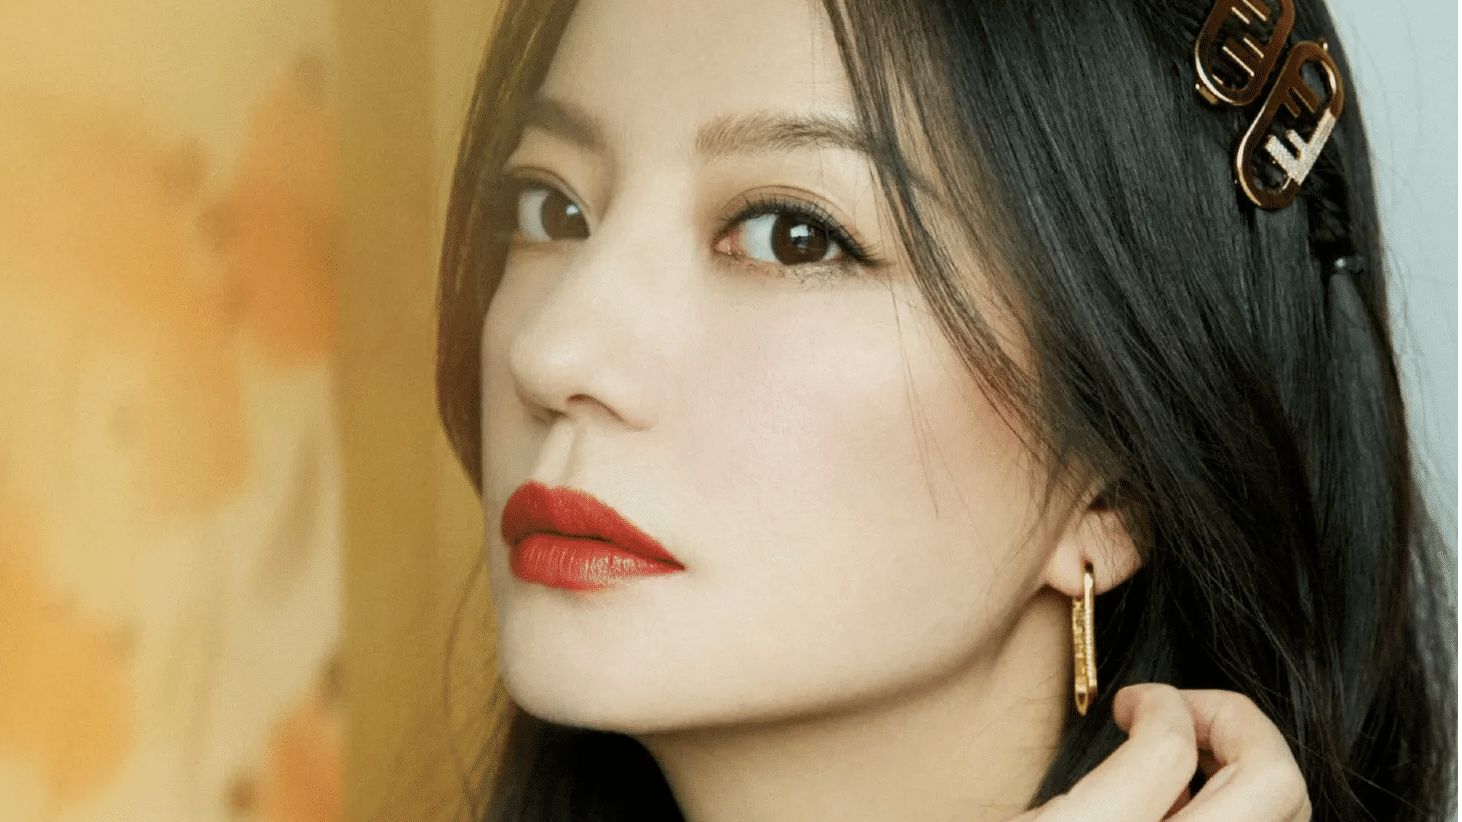 China takes down actor Zhao Wei’s works, fan club deactivated